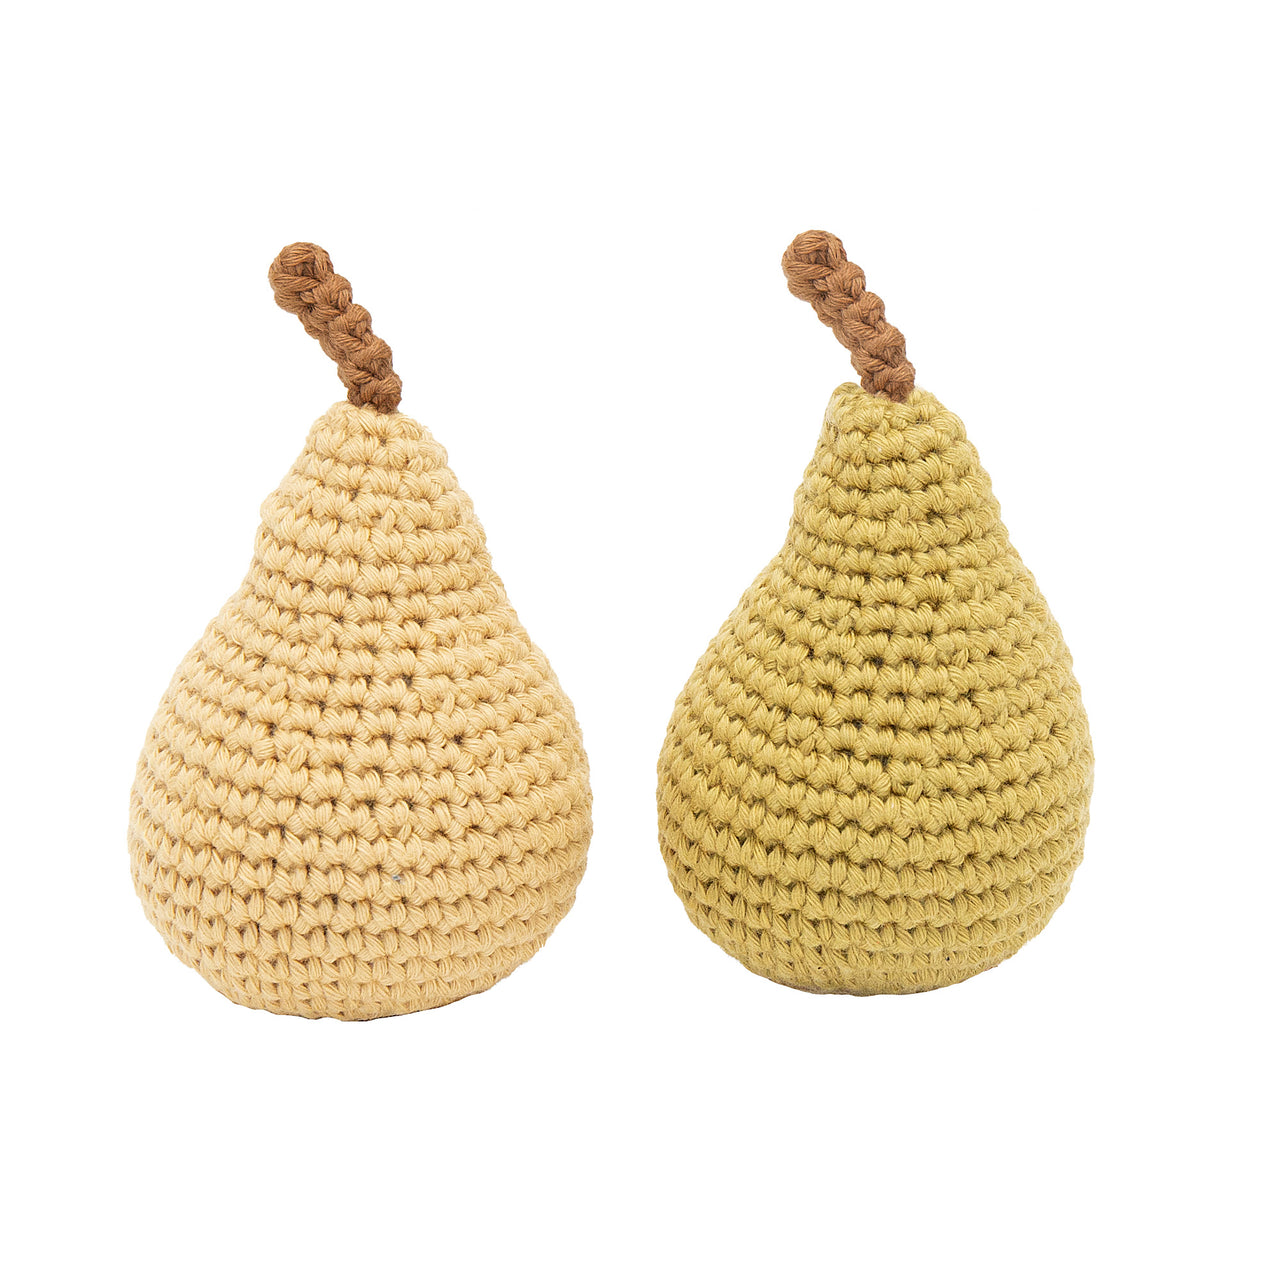 Patti Oslo Pear Rattle | pair Teething Rings & Rattles & Baby Gym Toys